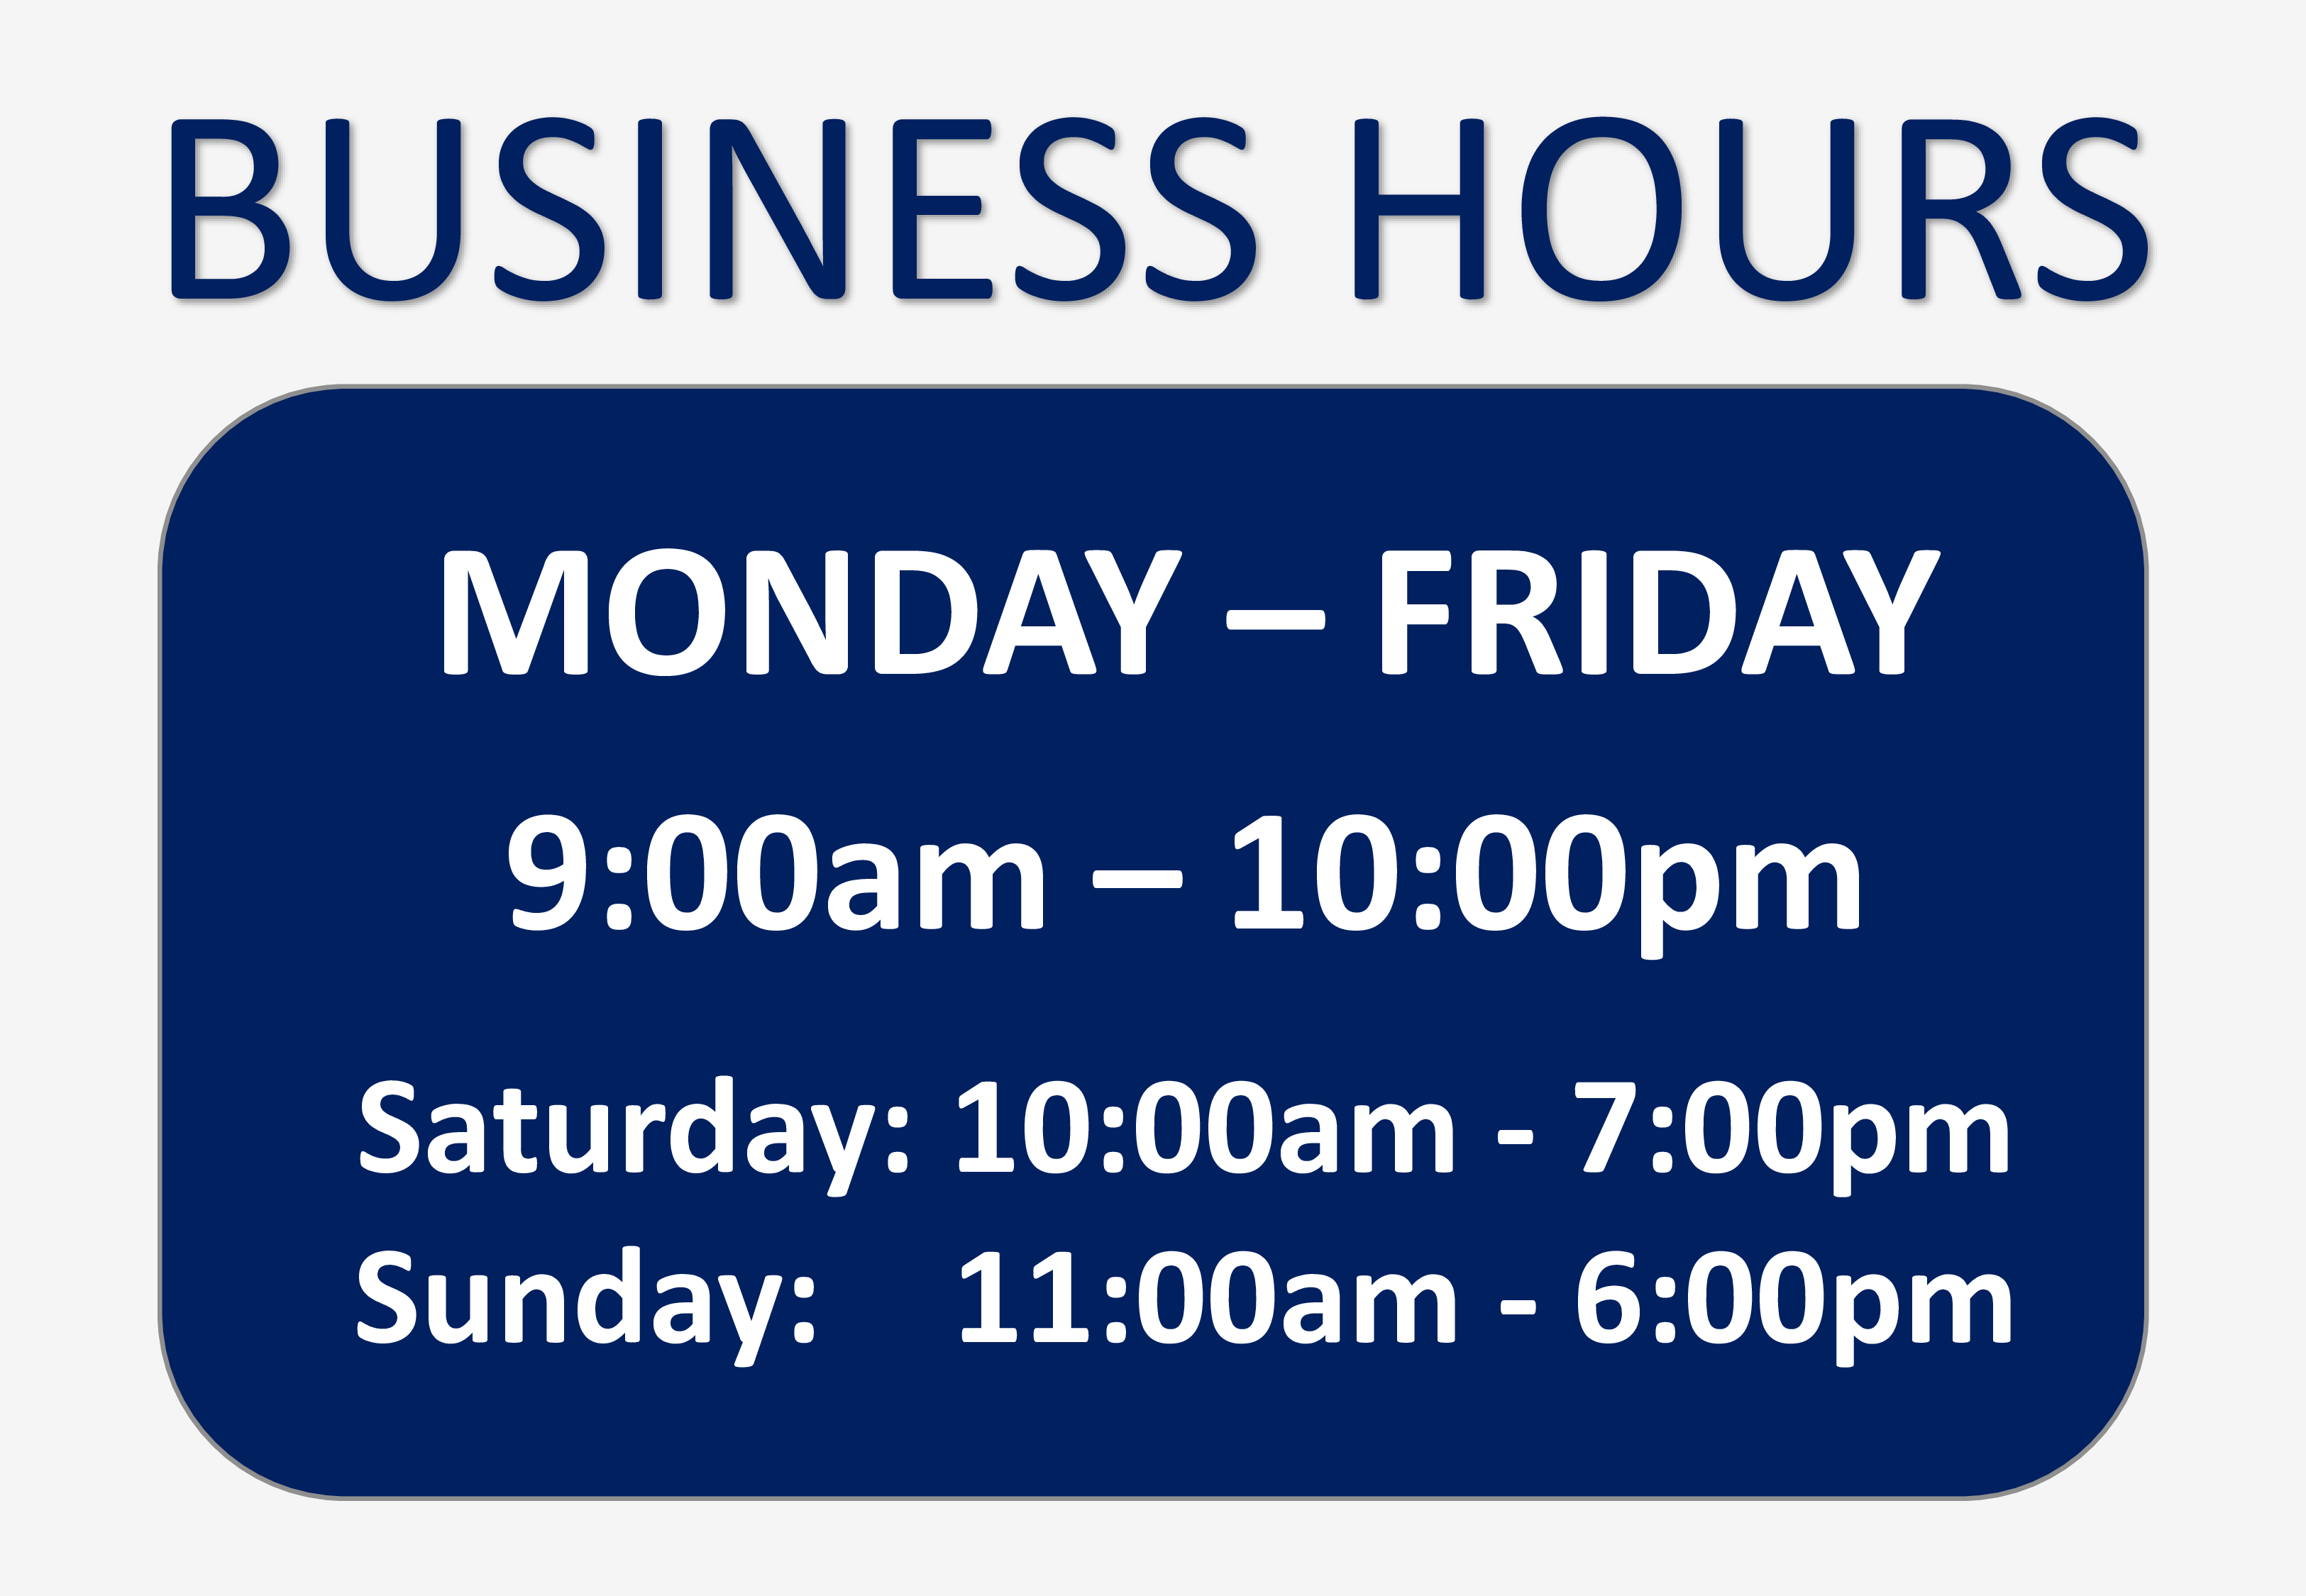 Business Hours Sign Templates at allbusinesstemplates com